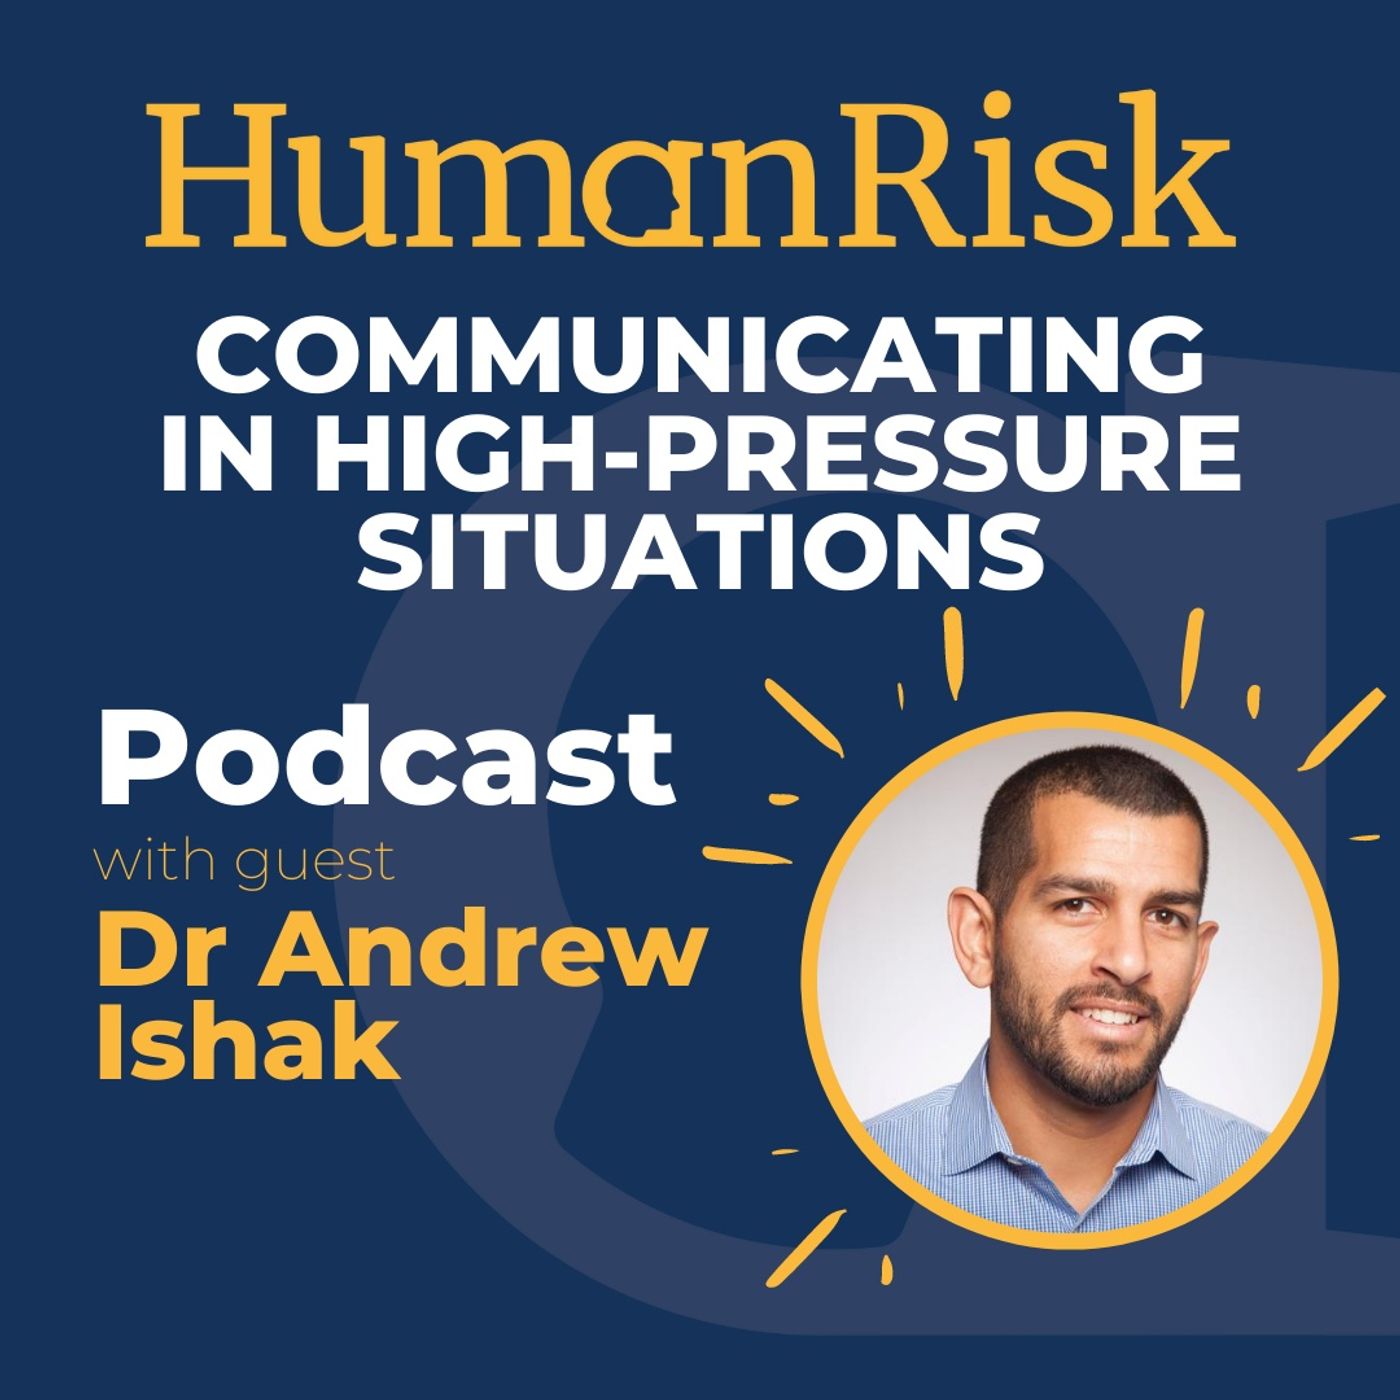 Dr Andrew Ishak on Communication in High-Pressure Situations